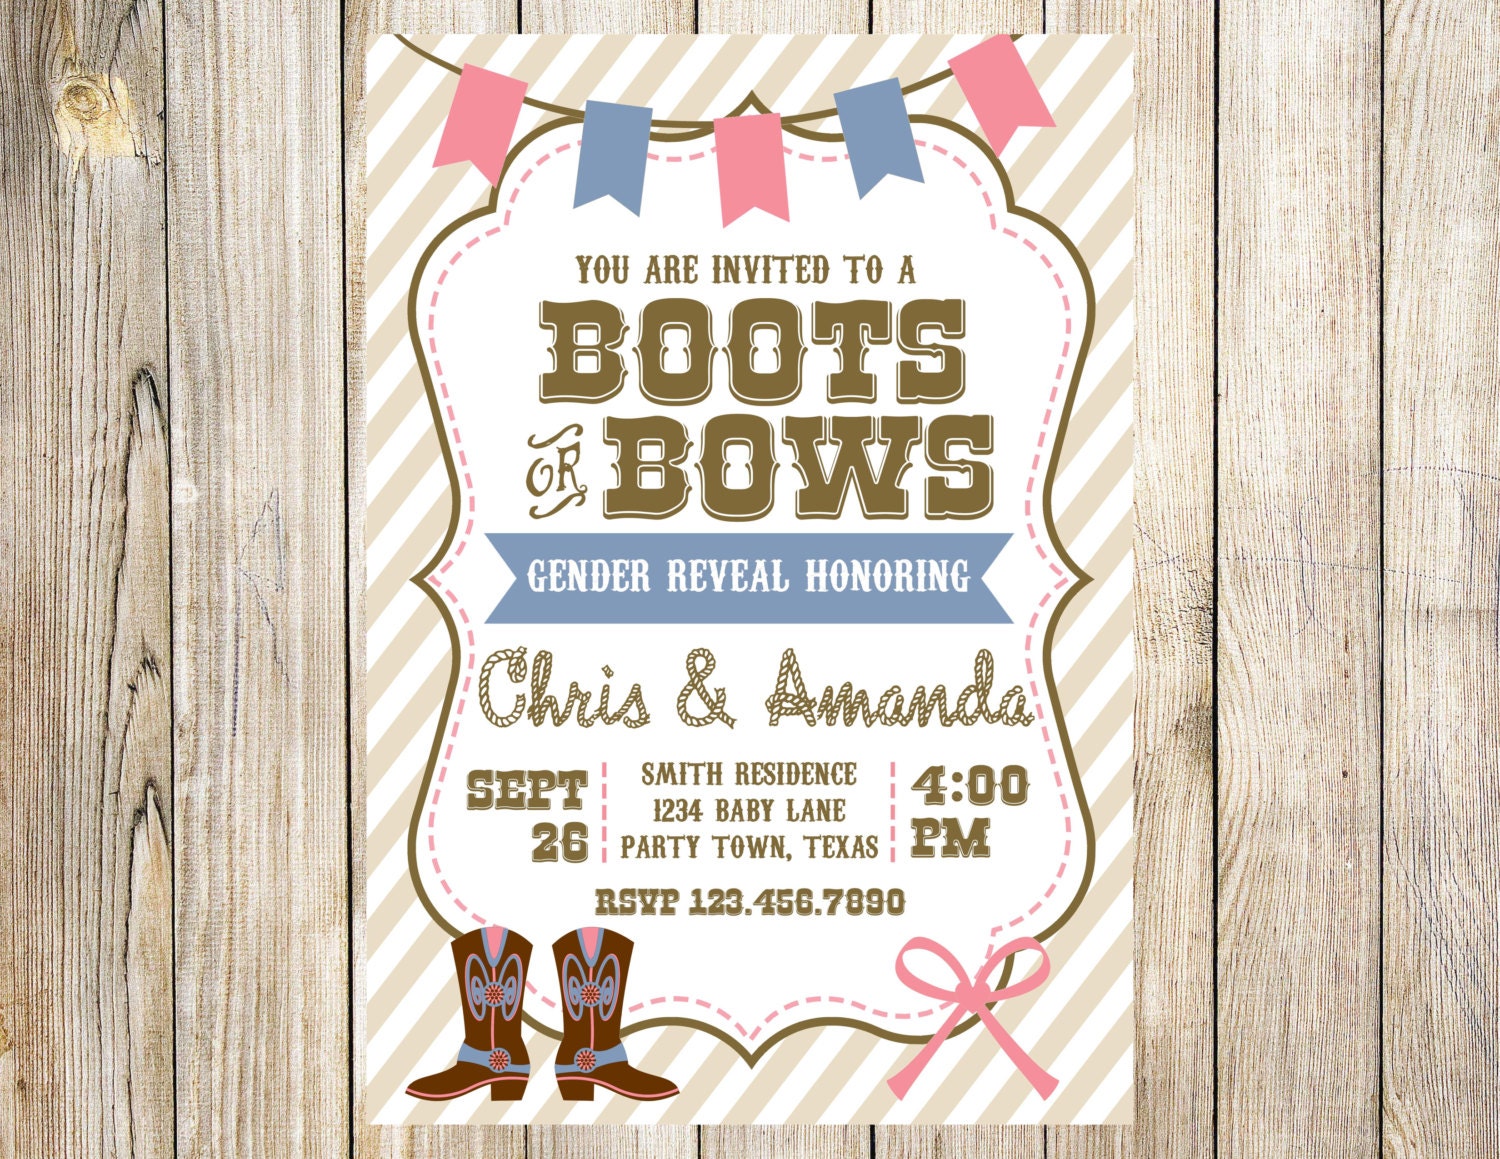 Boots Or Bows Gender Reveal Invitations 8